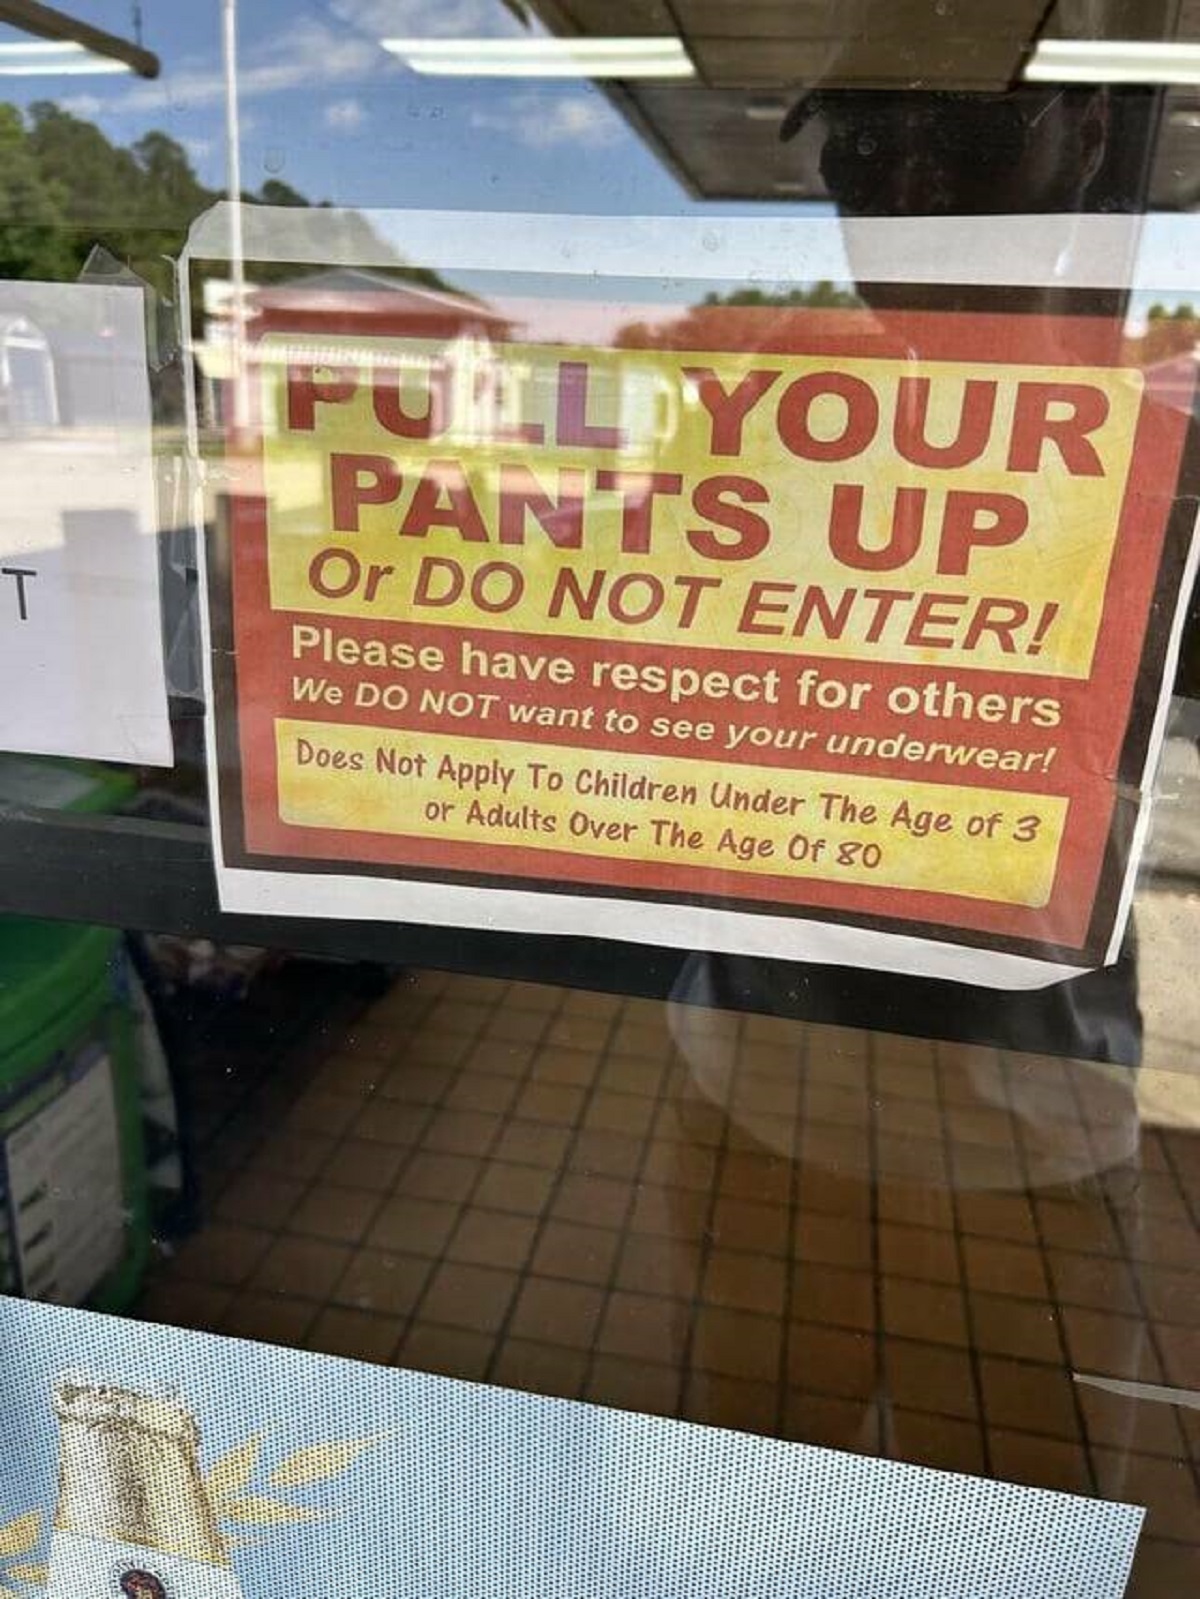 "This sign that doesn’t apply to 80 or 3 year olds"